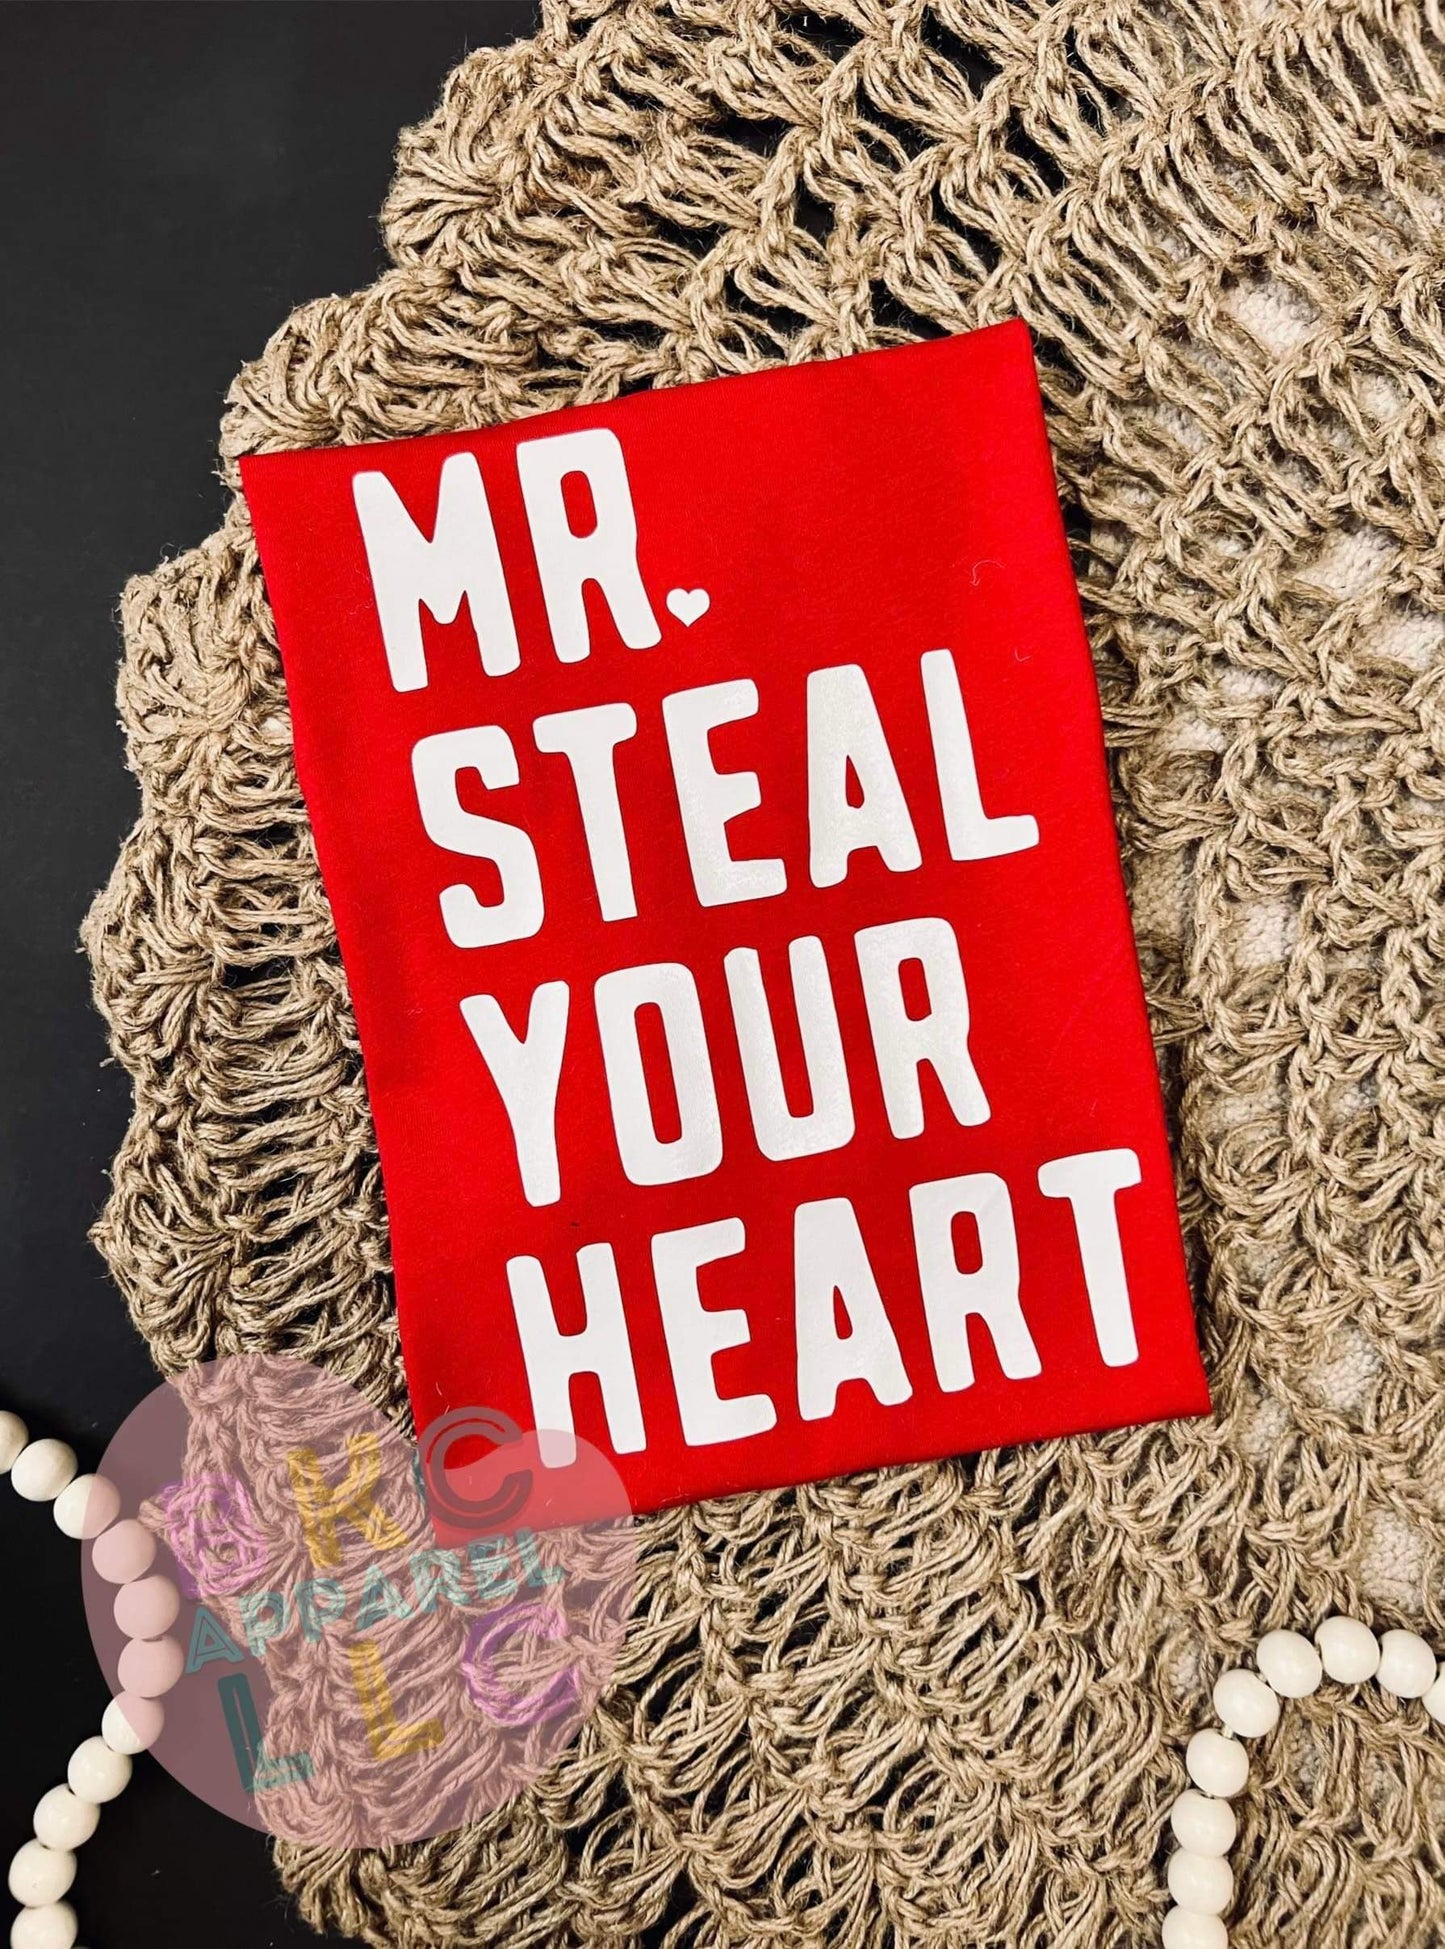 Mr. Steal Your Heart Tee